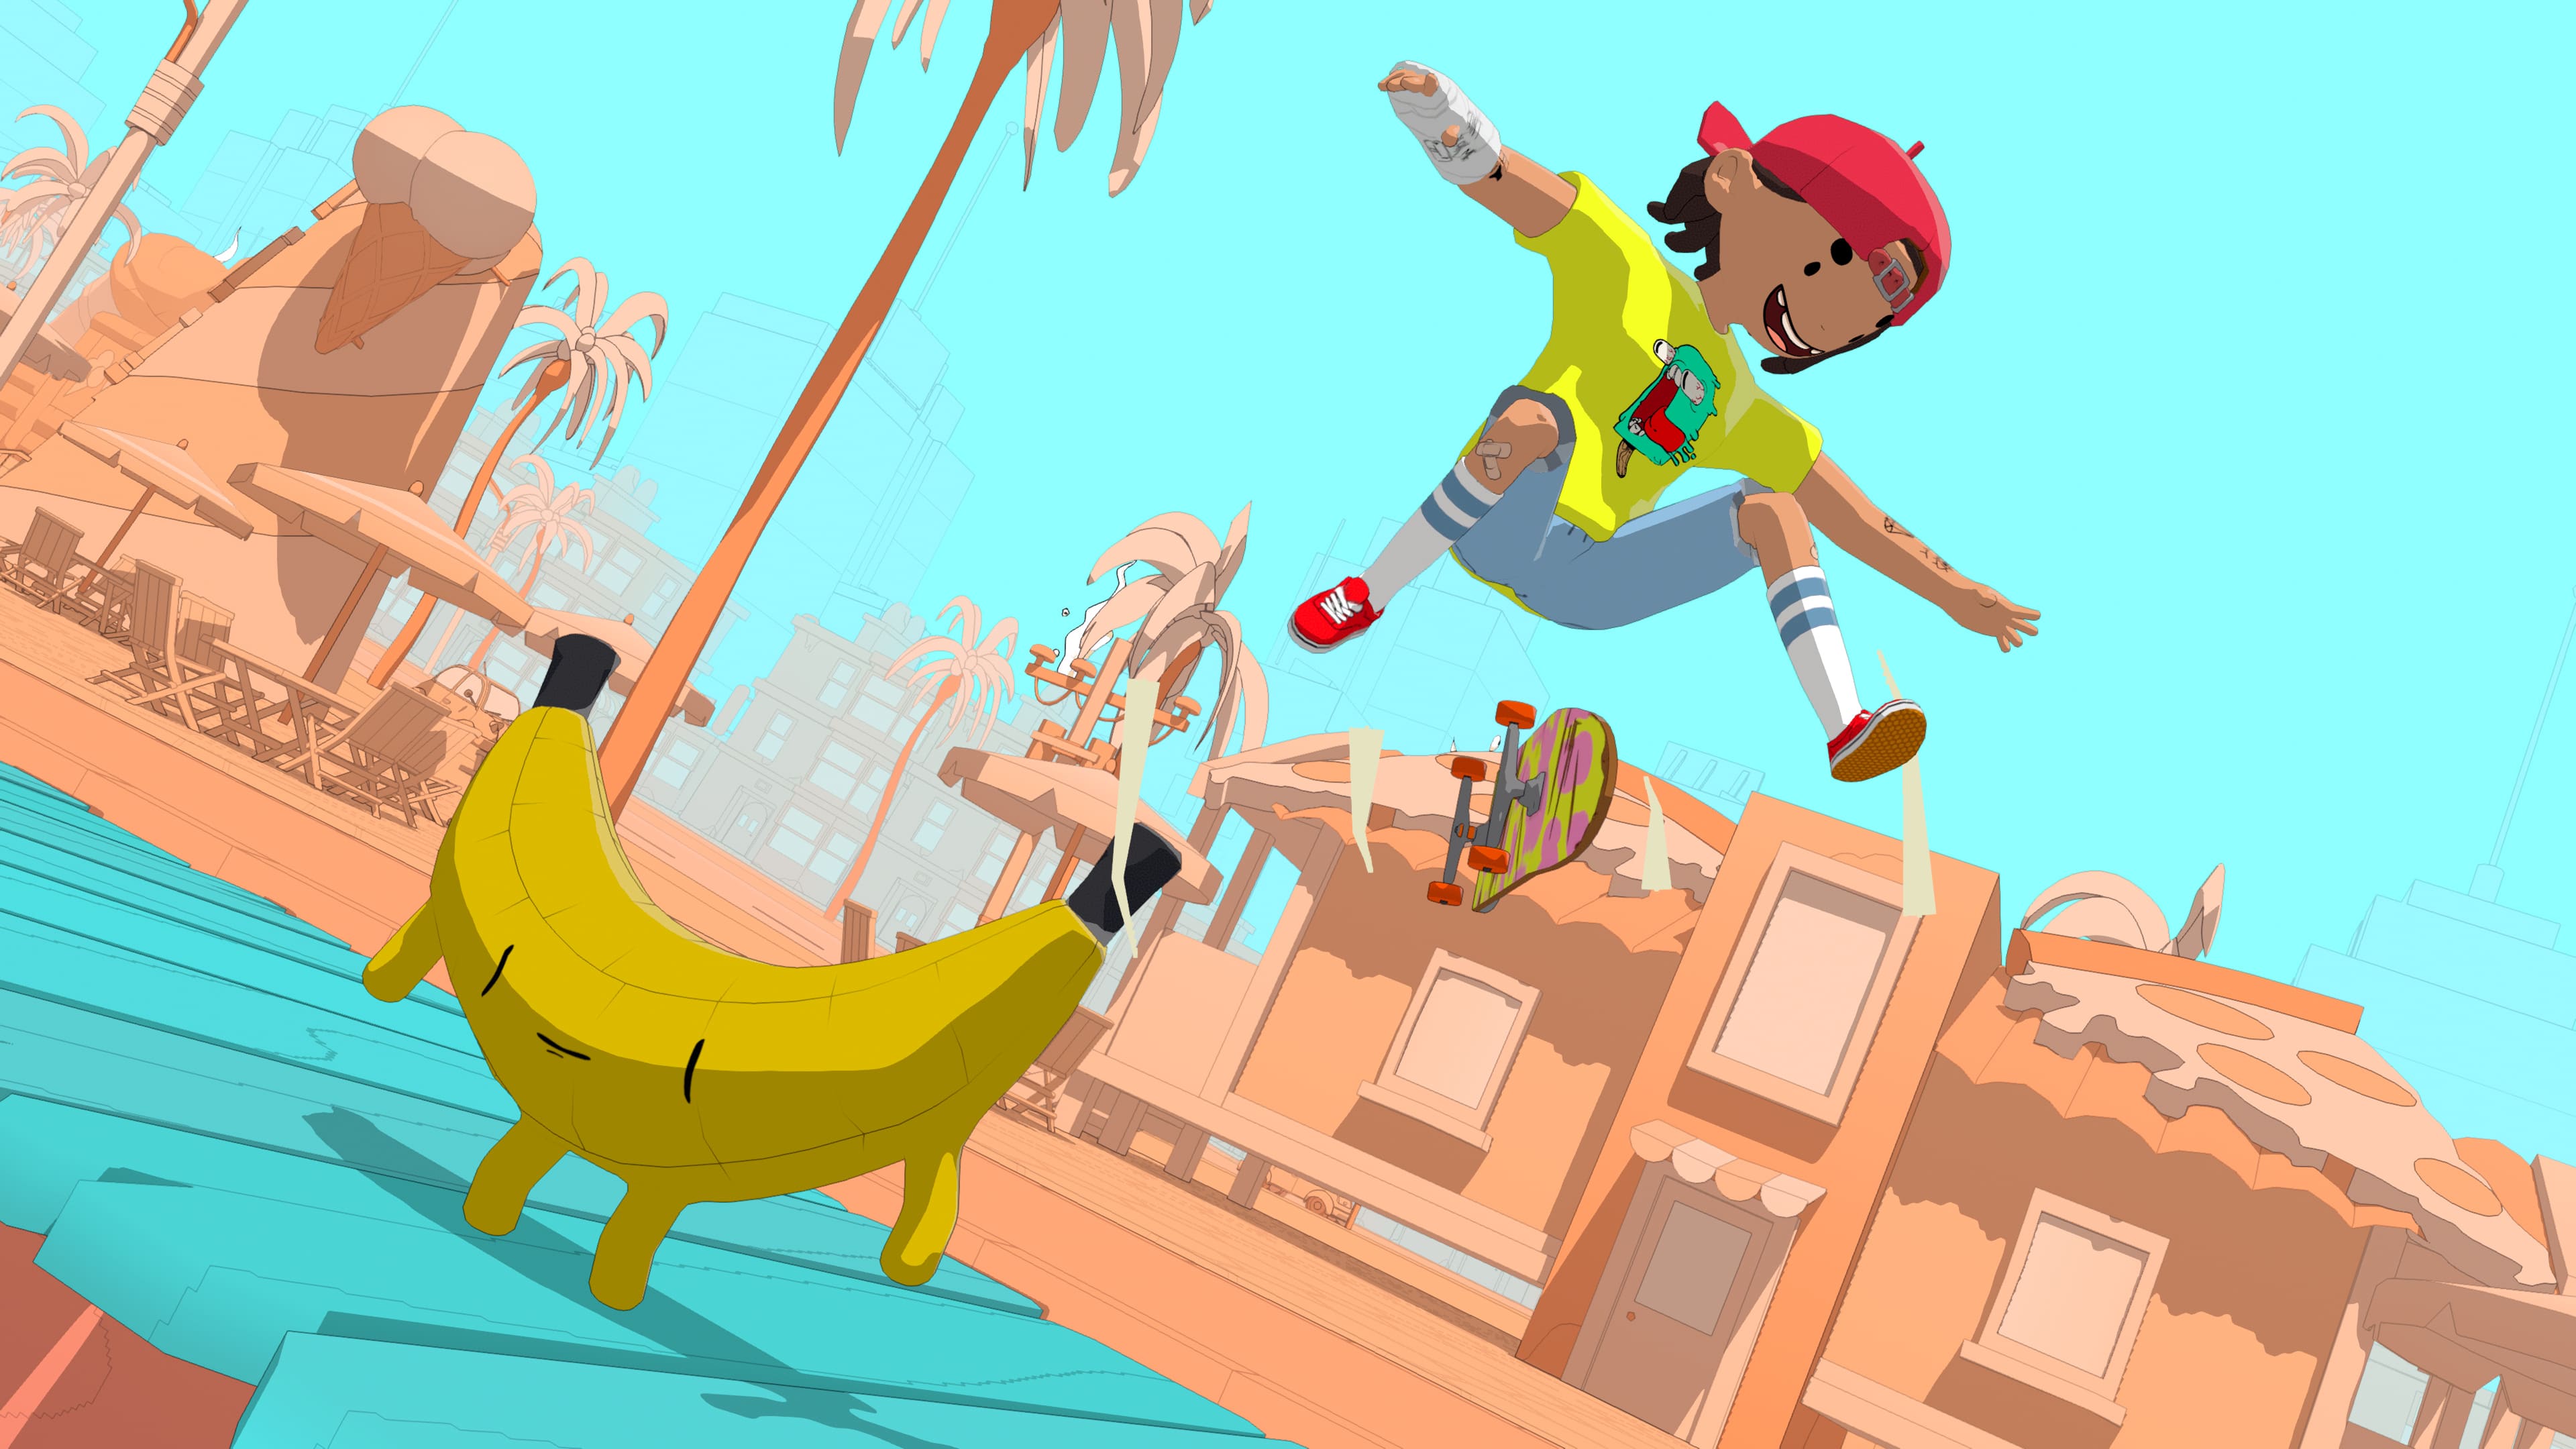 A character in a bright yellow shirt and red ballcap does a skateboard trick off the edge of a bench that looks like a banana.